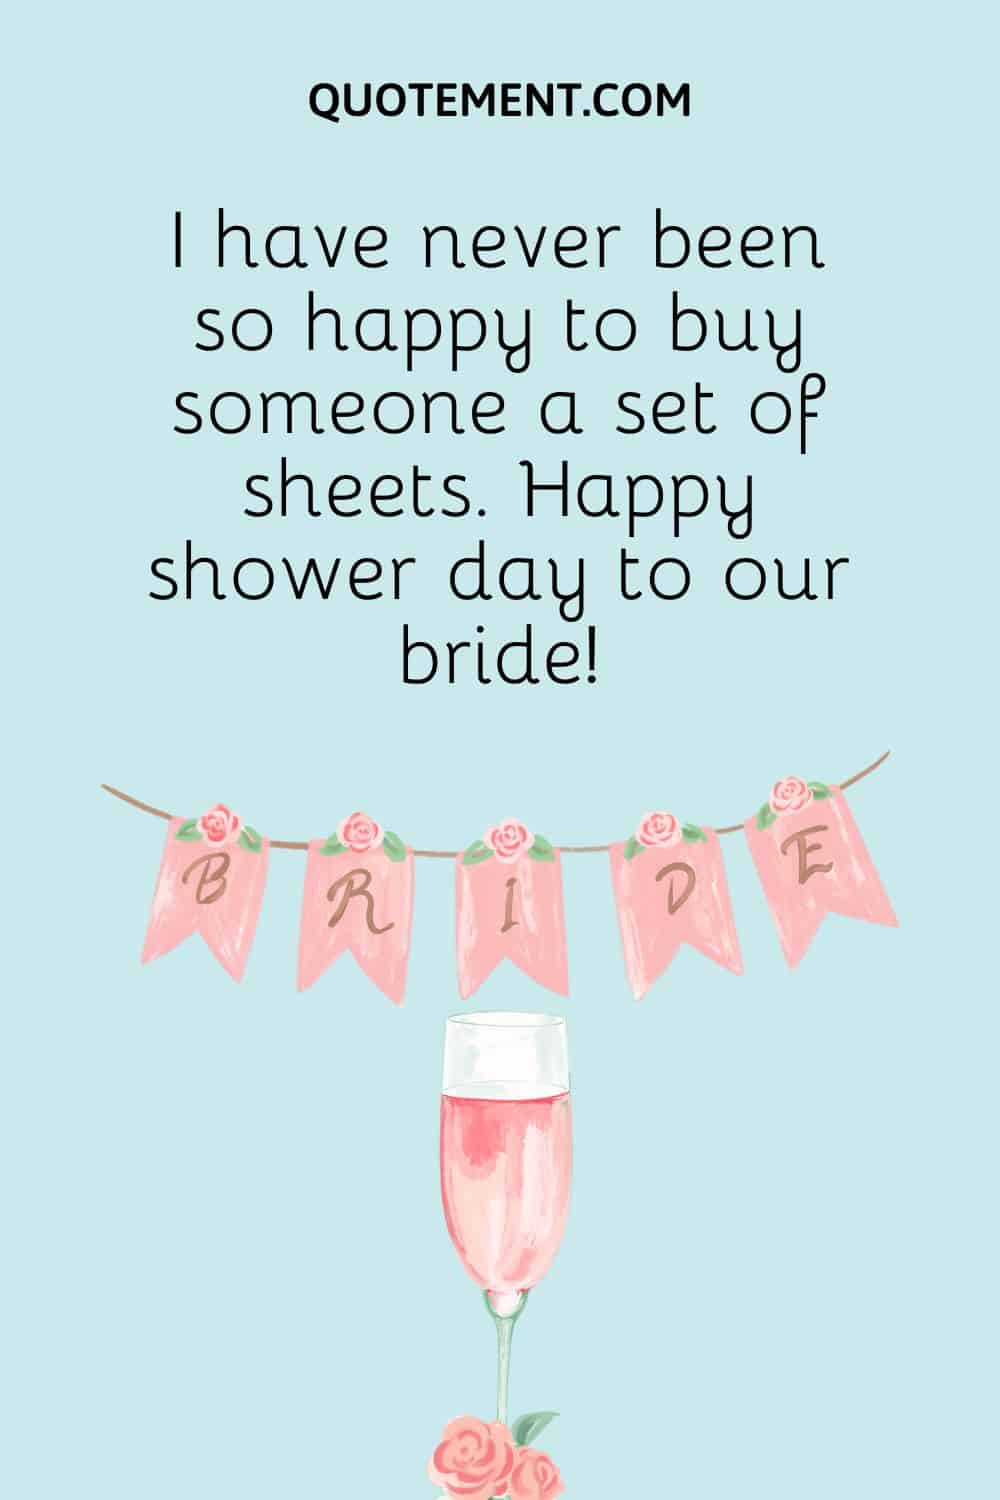 I have never been so happy to buy someone a set of sheets. Happy shower day to our bride!